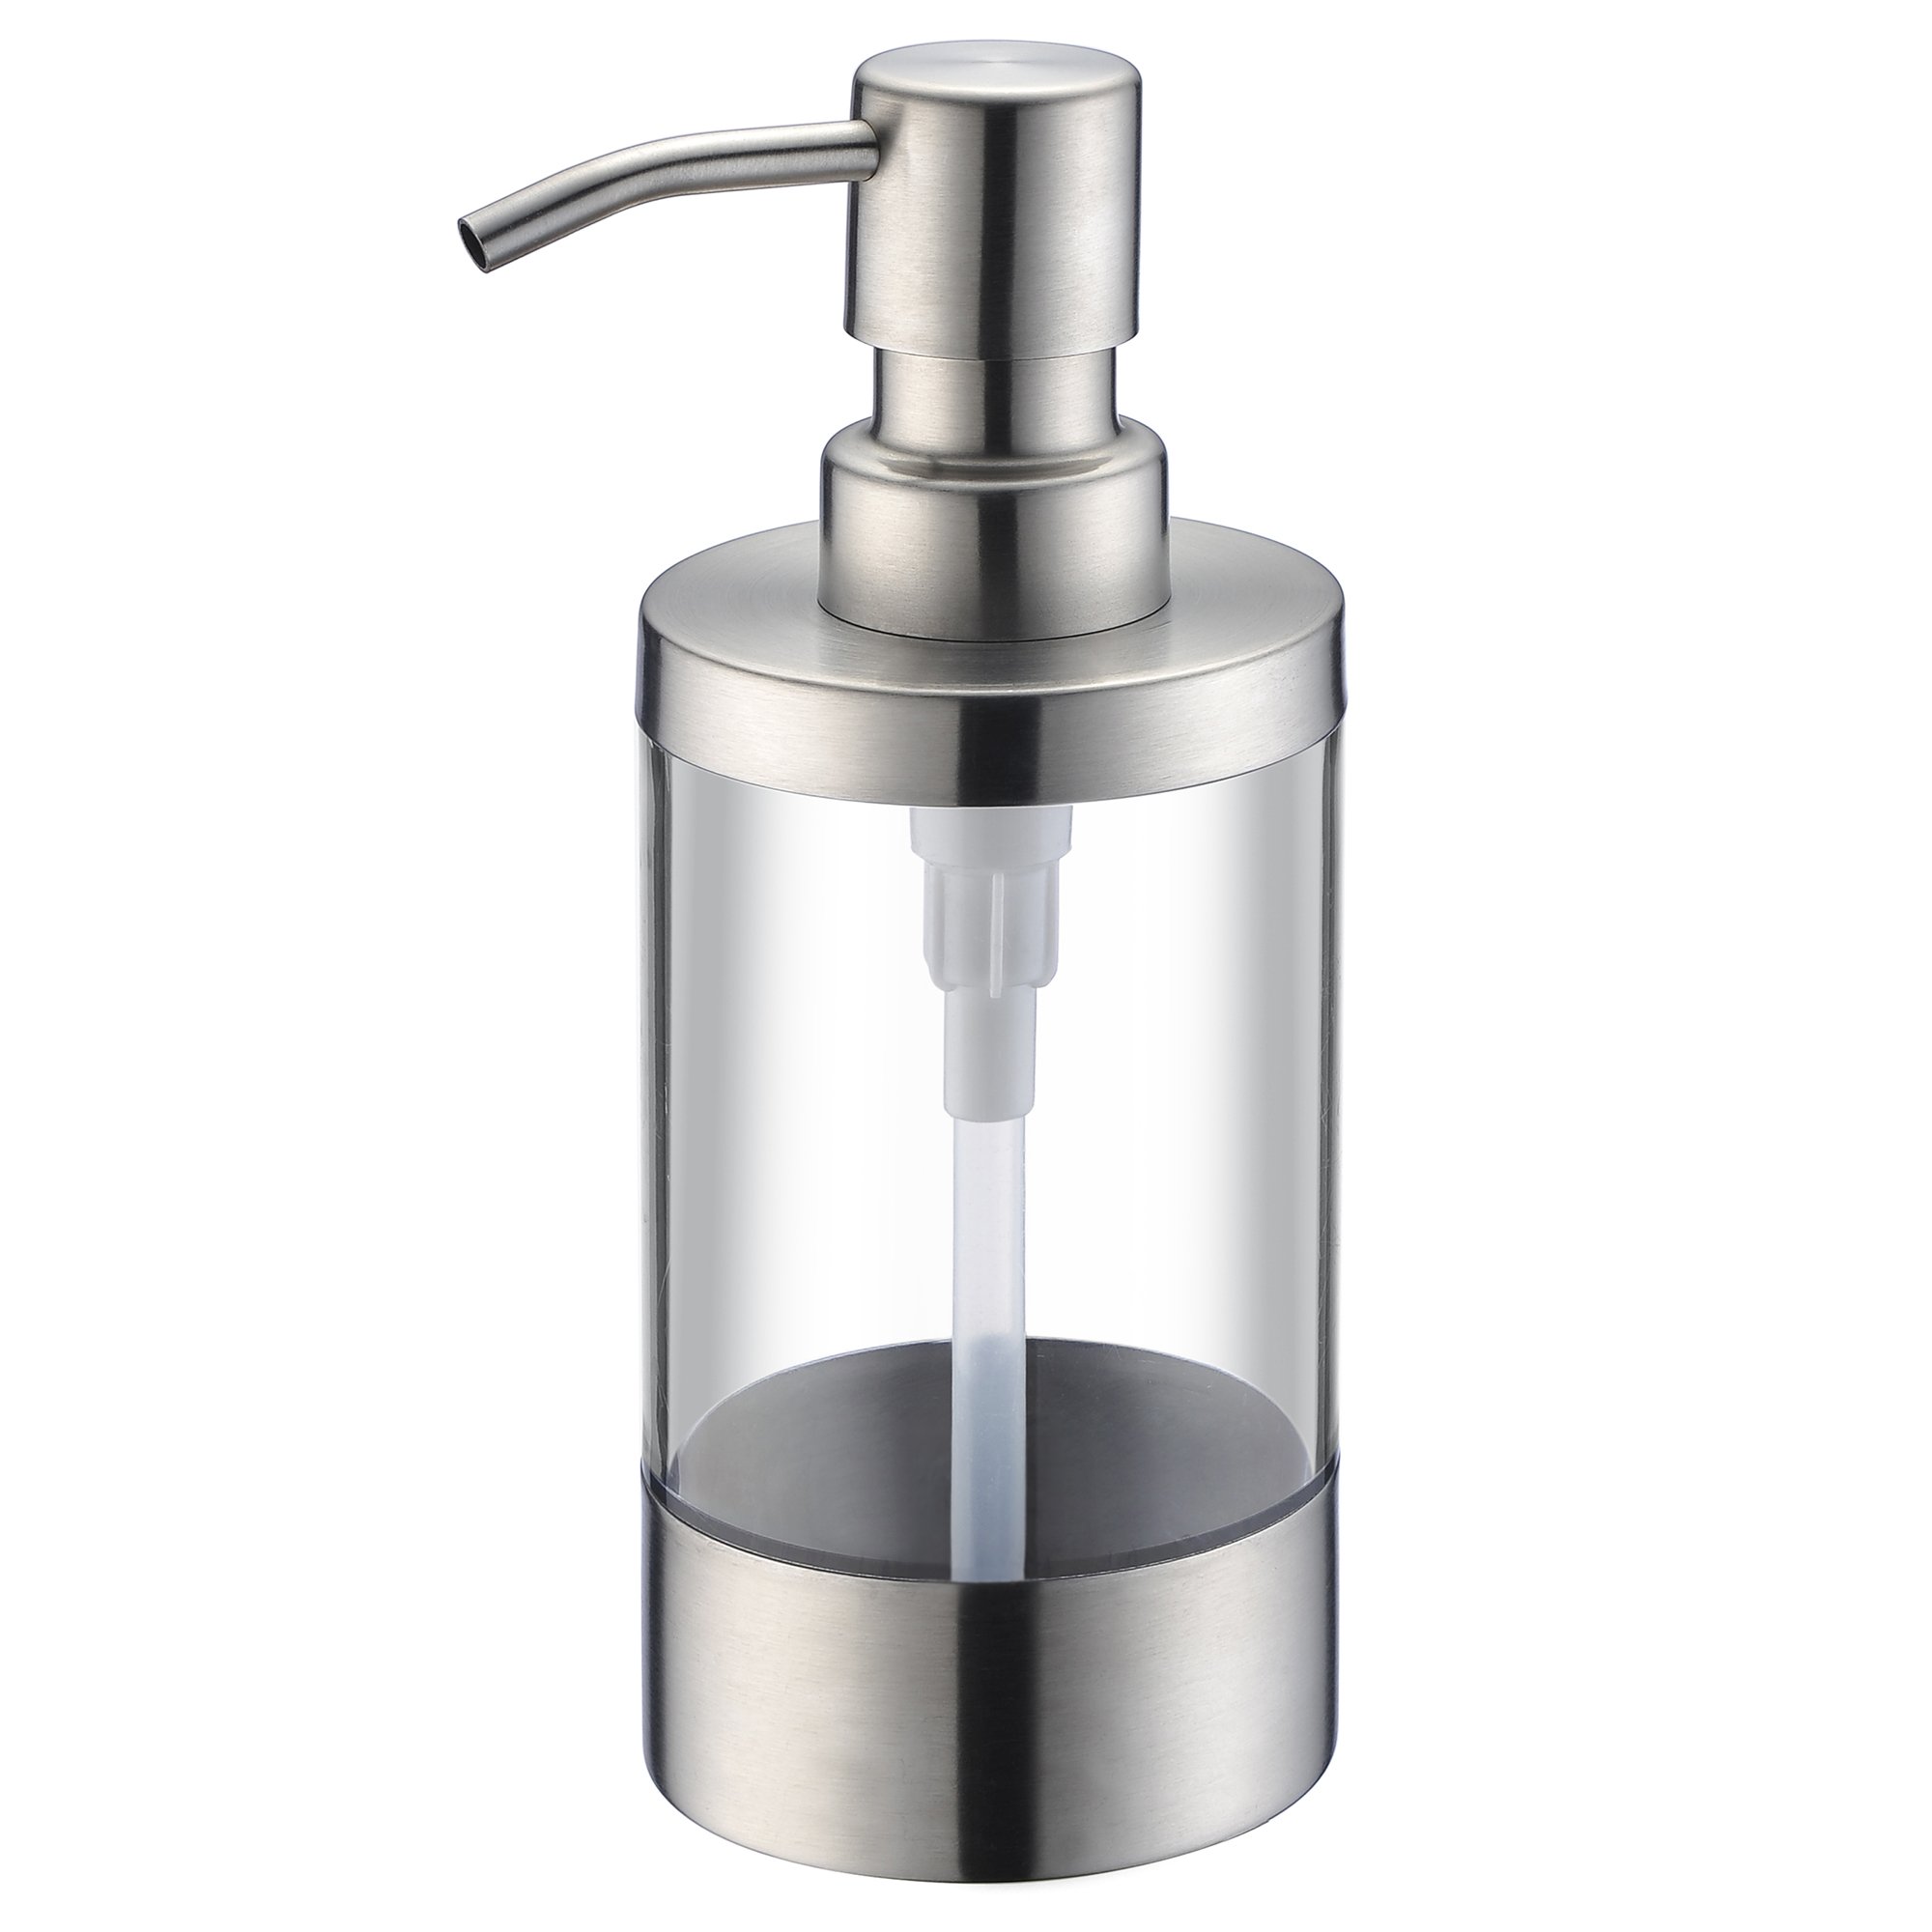 Book Cover BZOOSIU Brushed Nickel Lotion/Soap Dispenser,Stainless Steel Pump For Kitchen and Bathroom (8.5Ounce - Refillable) Exclusive Sale For This Brand